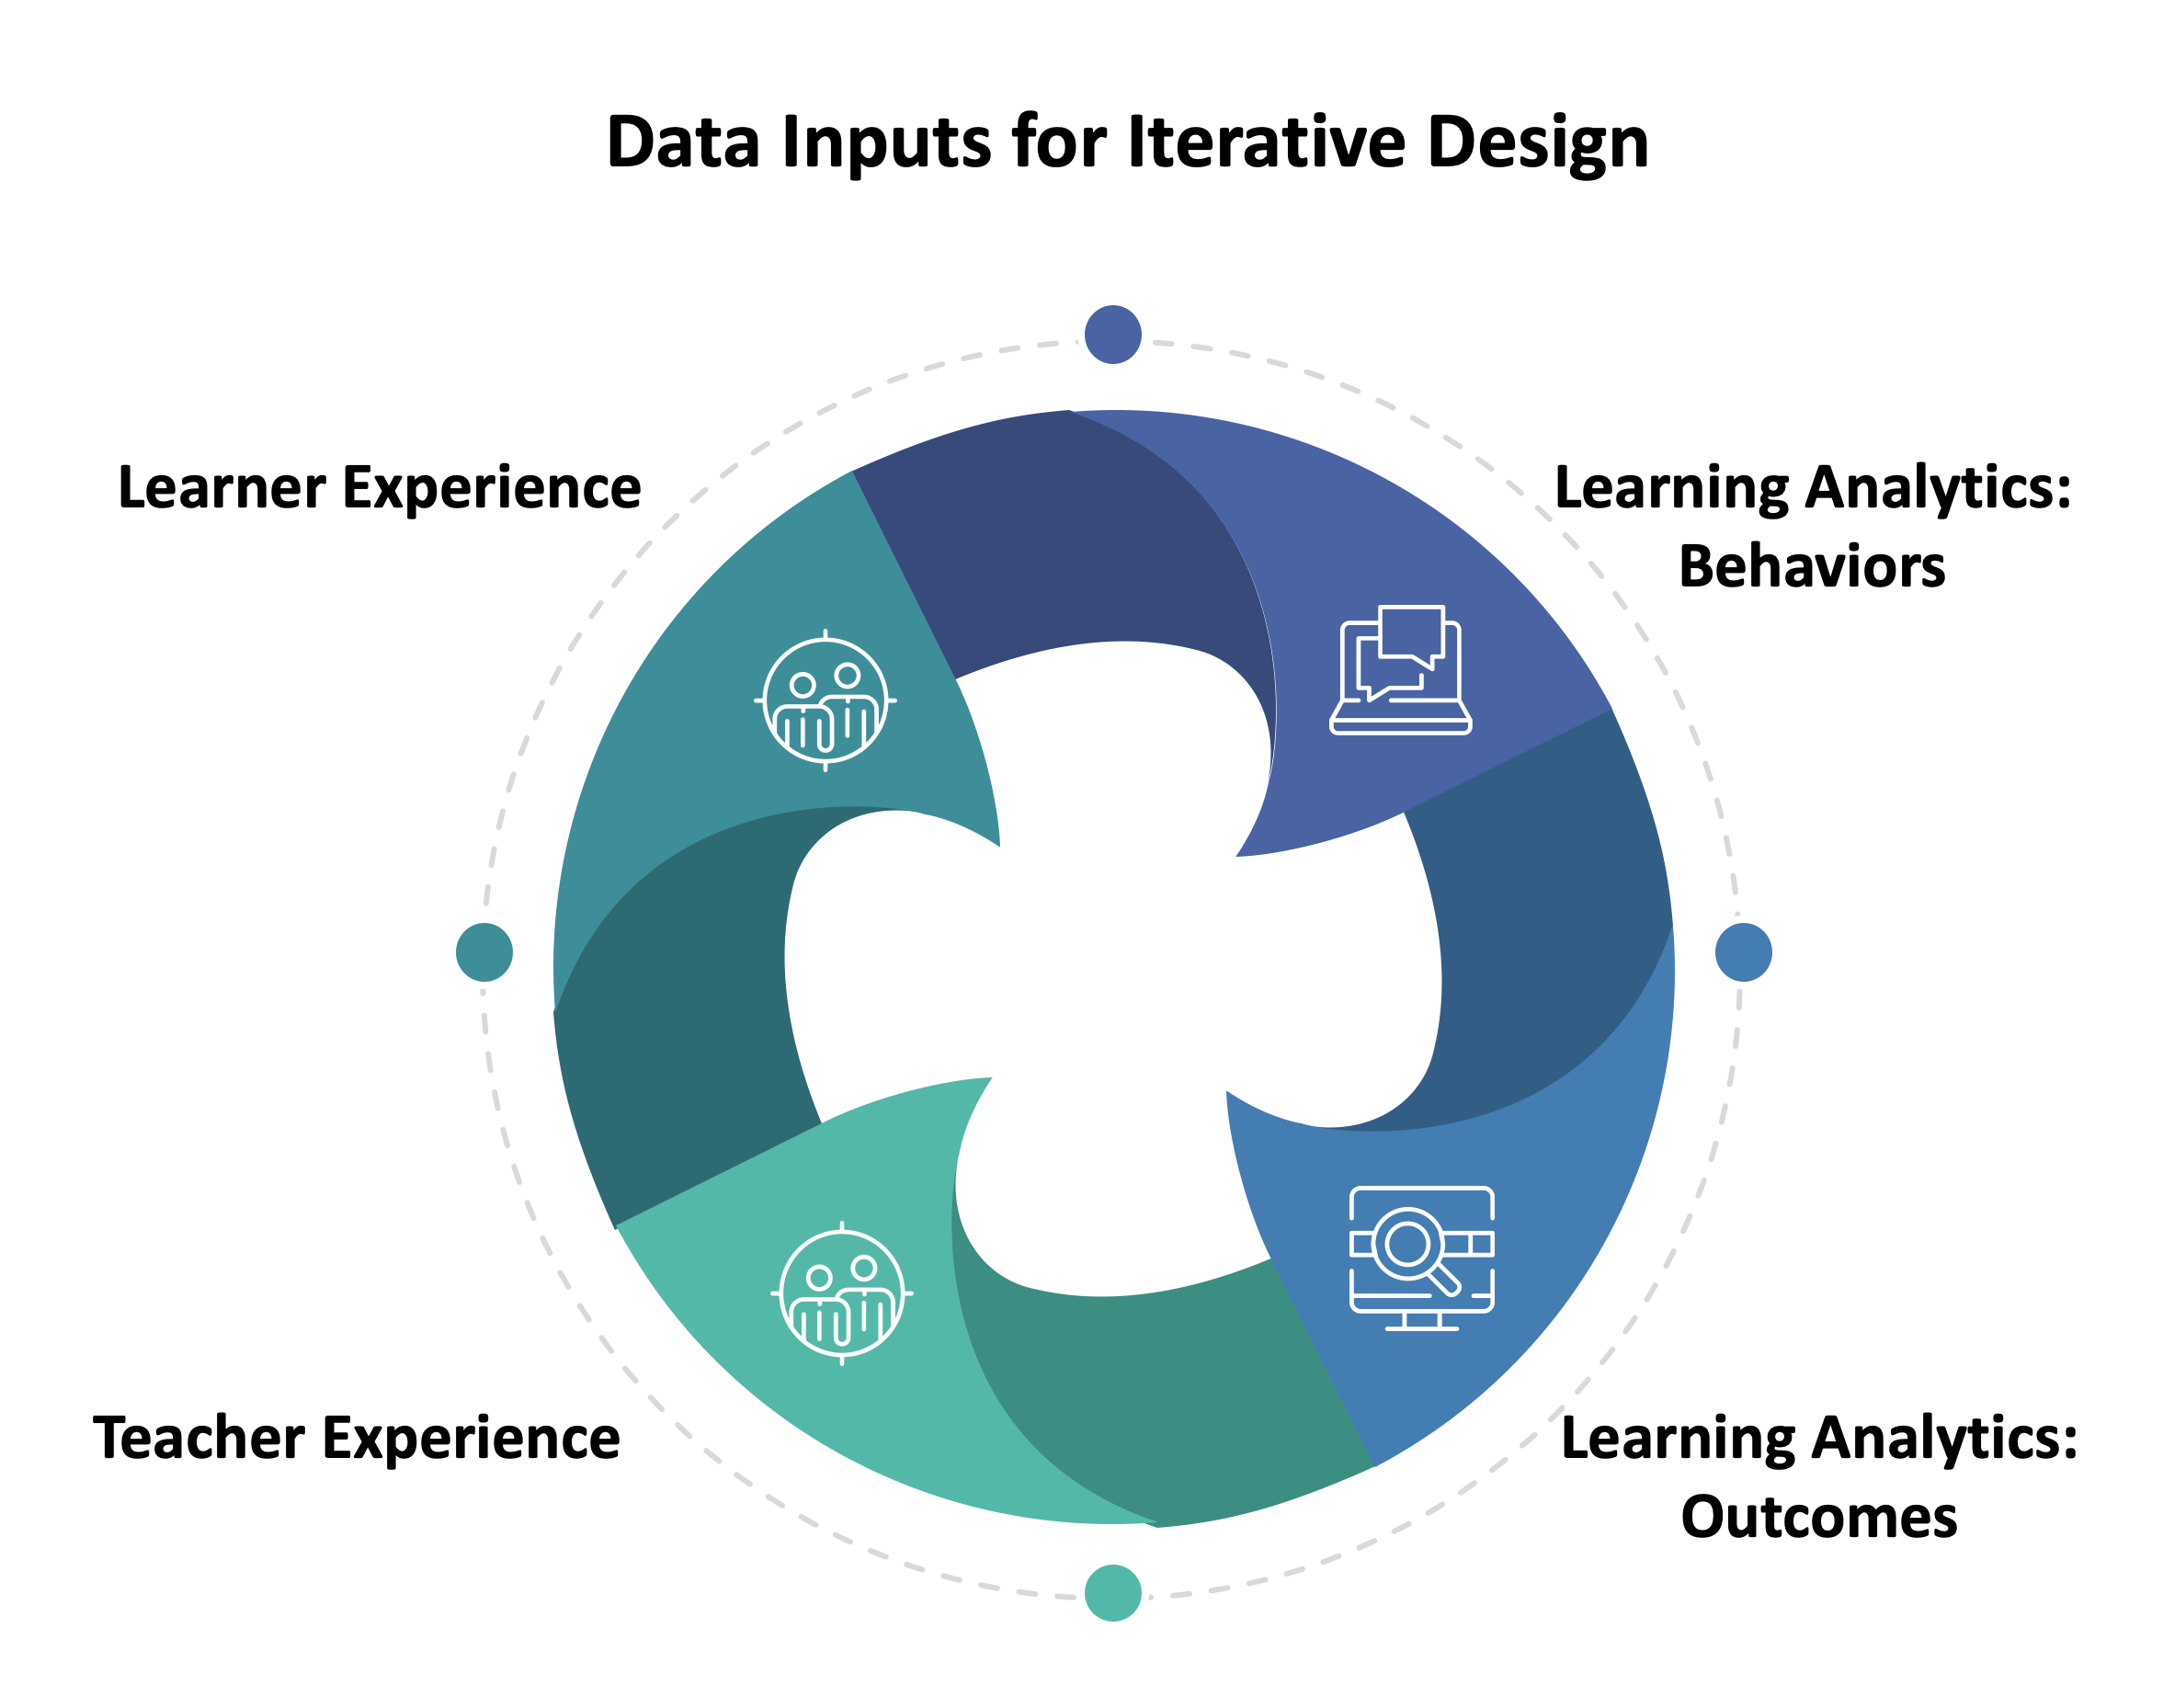 Image of the Data Inputs for Iterative Design